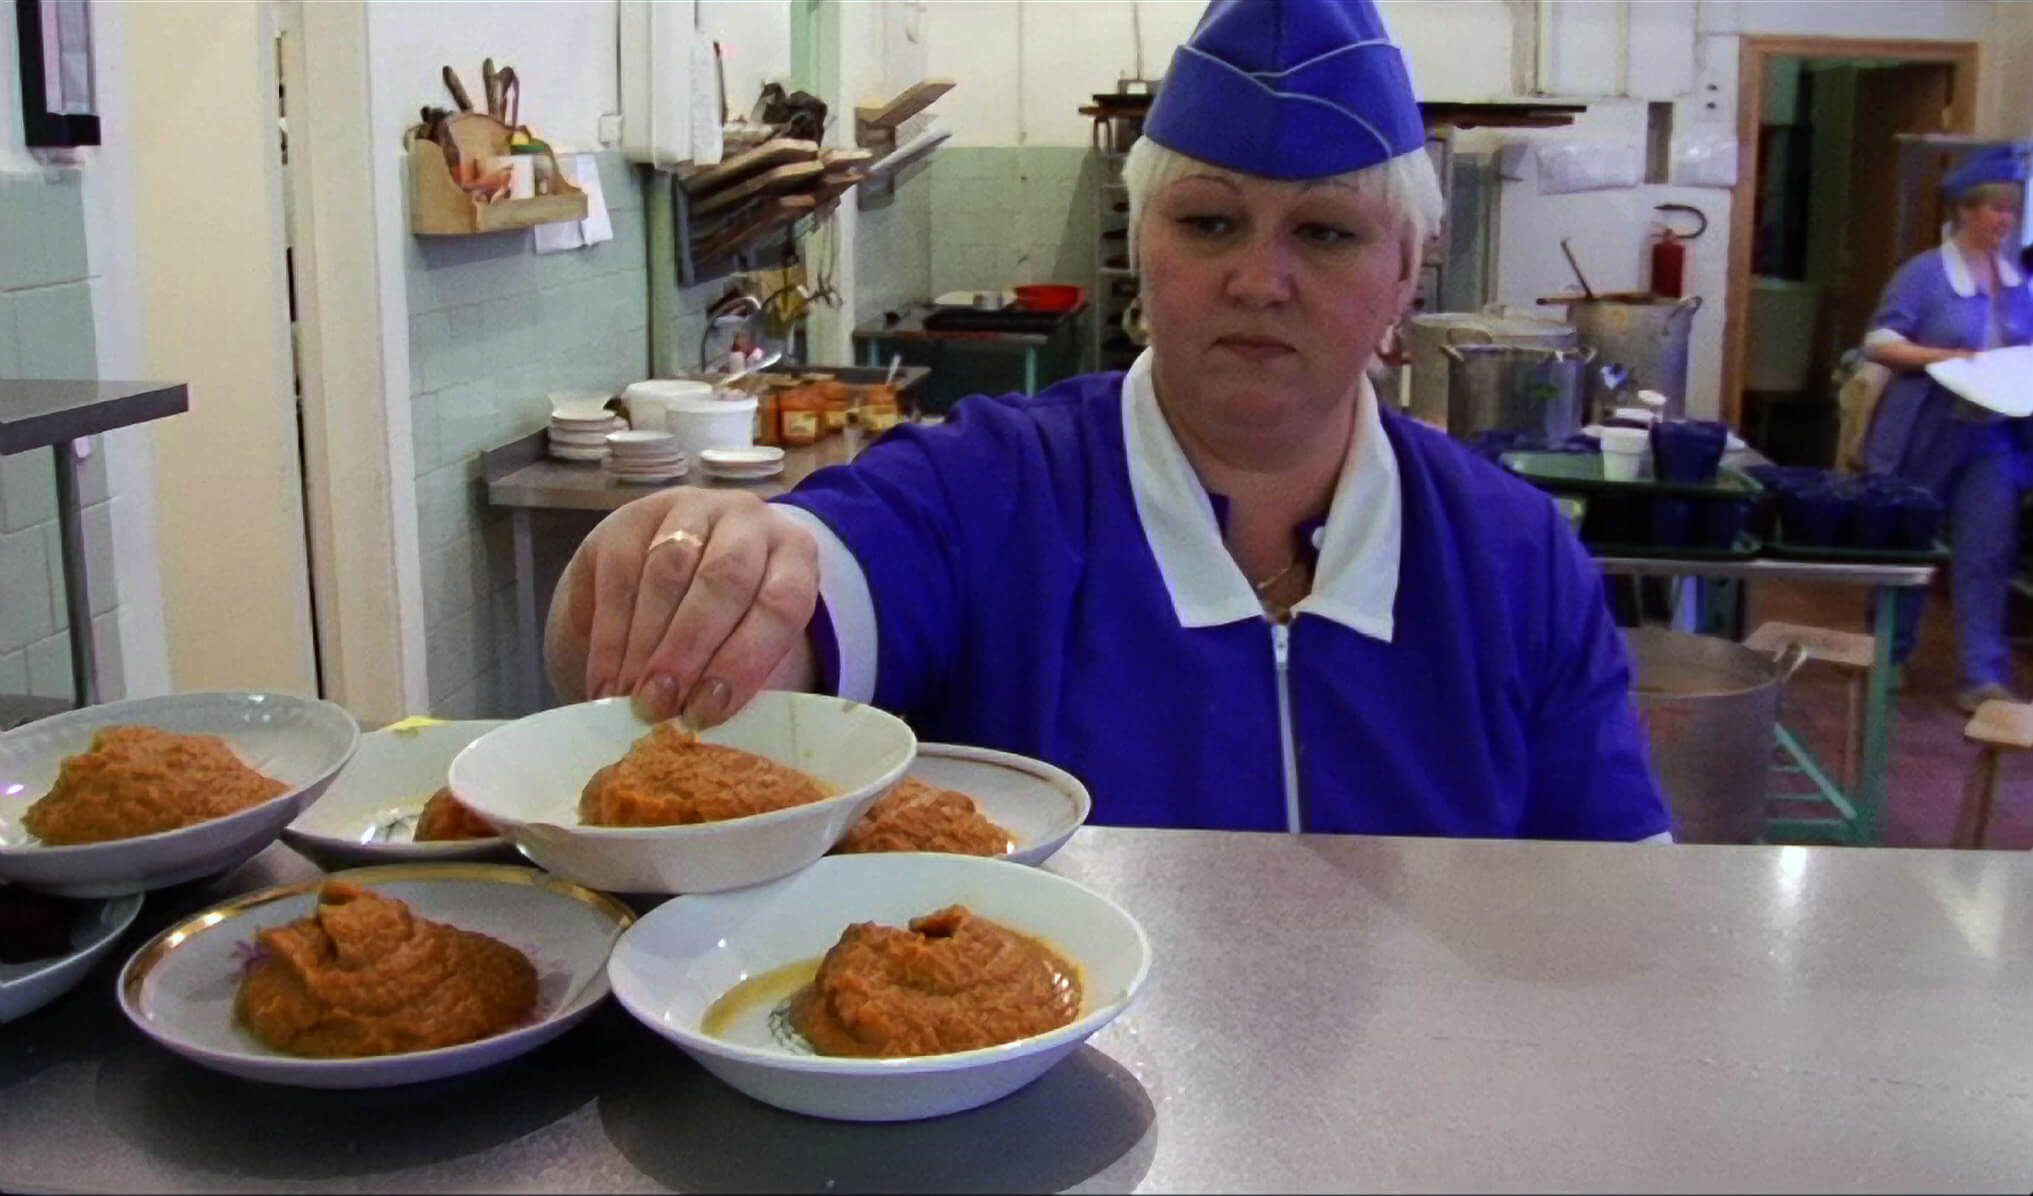 Still from My Perestroika. A woman in a kitchen, dressed in a purple uniform, balances a dish of food on top of others on display.